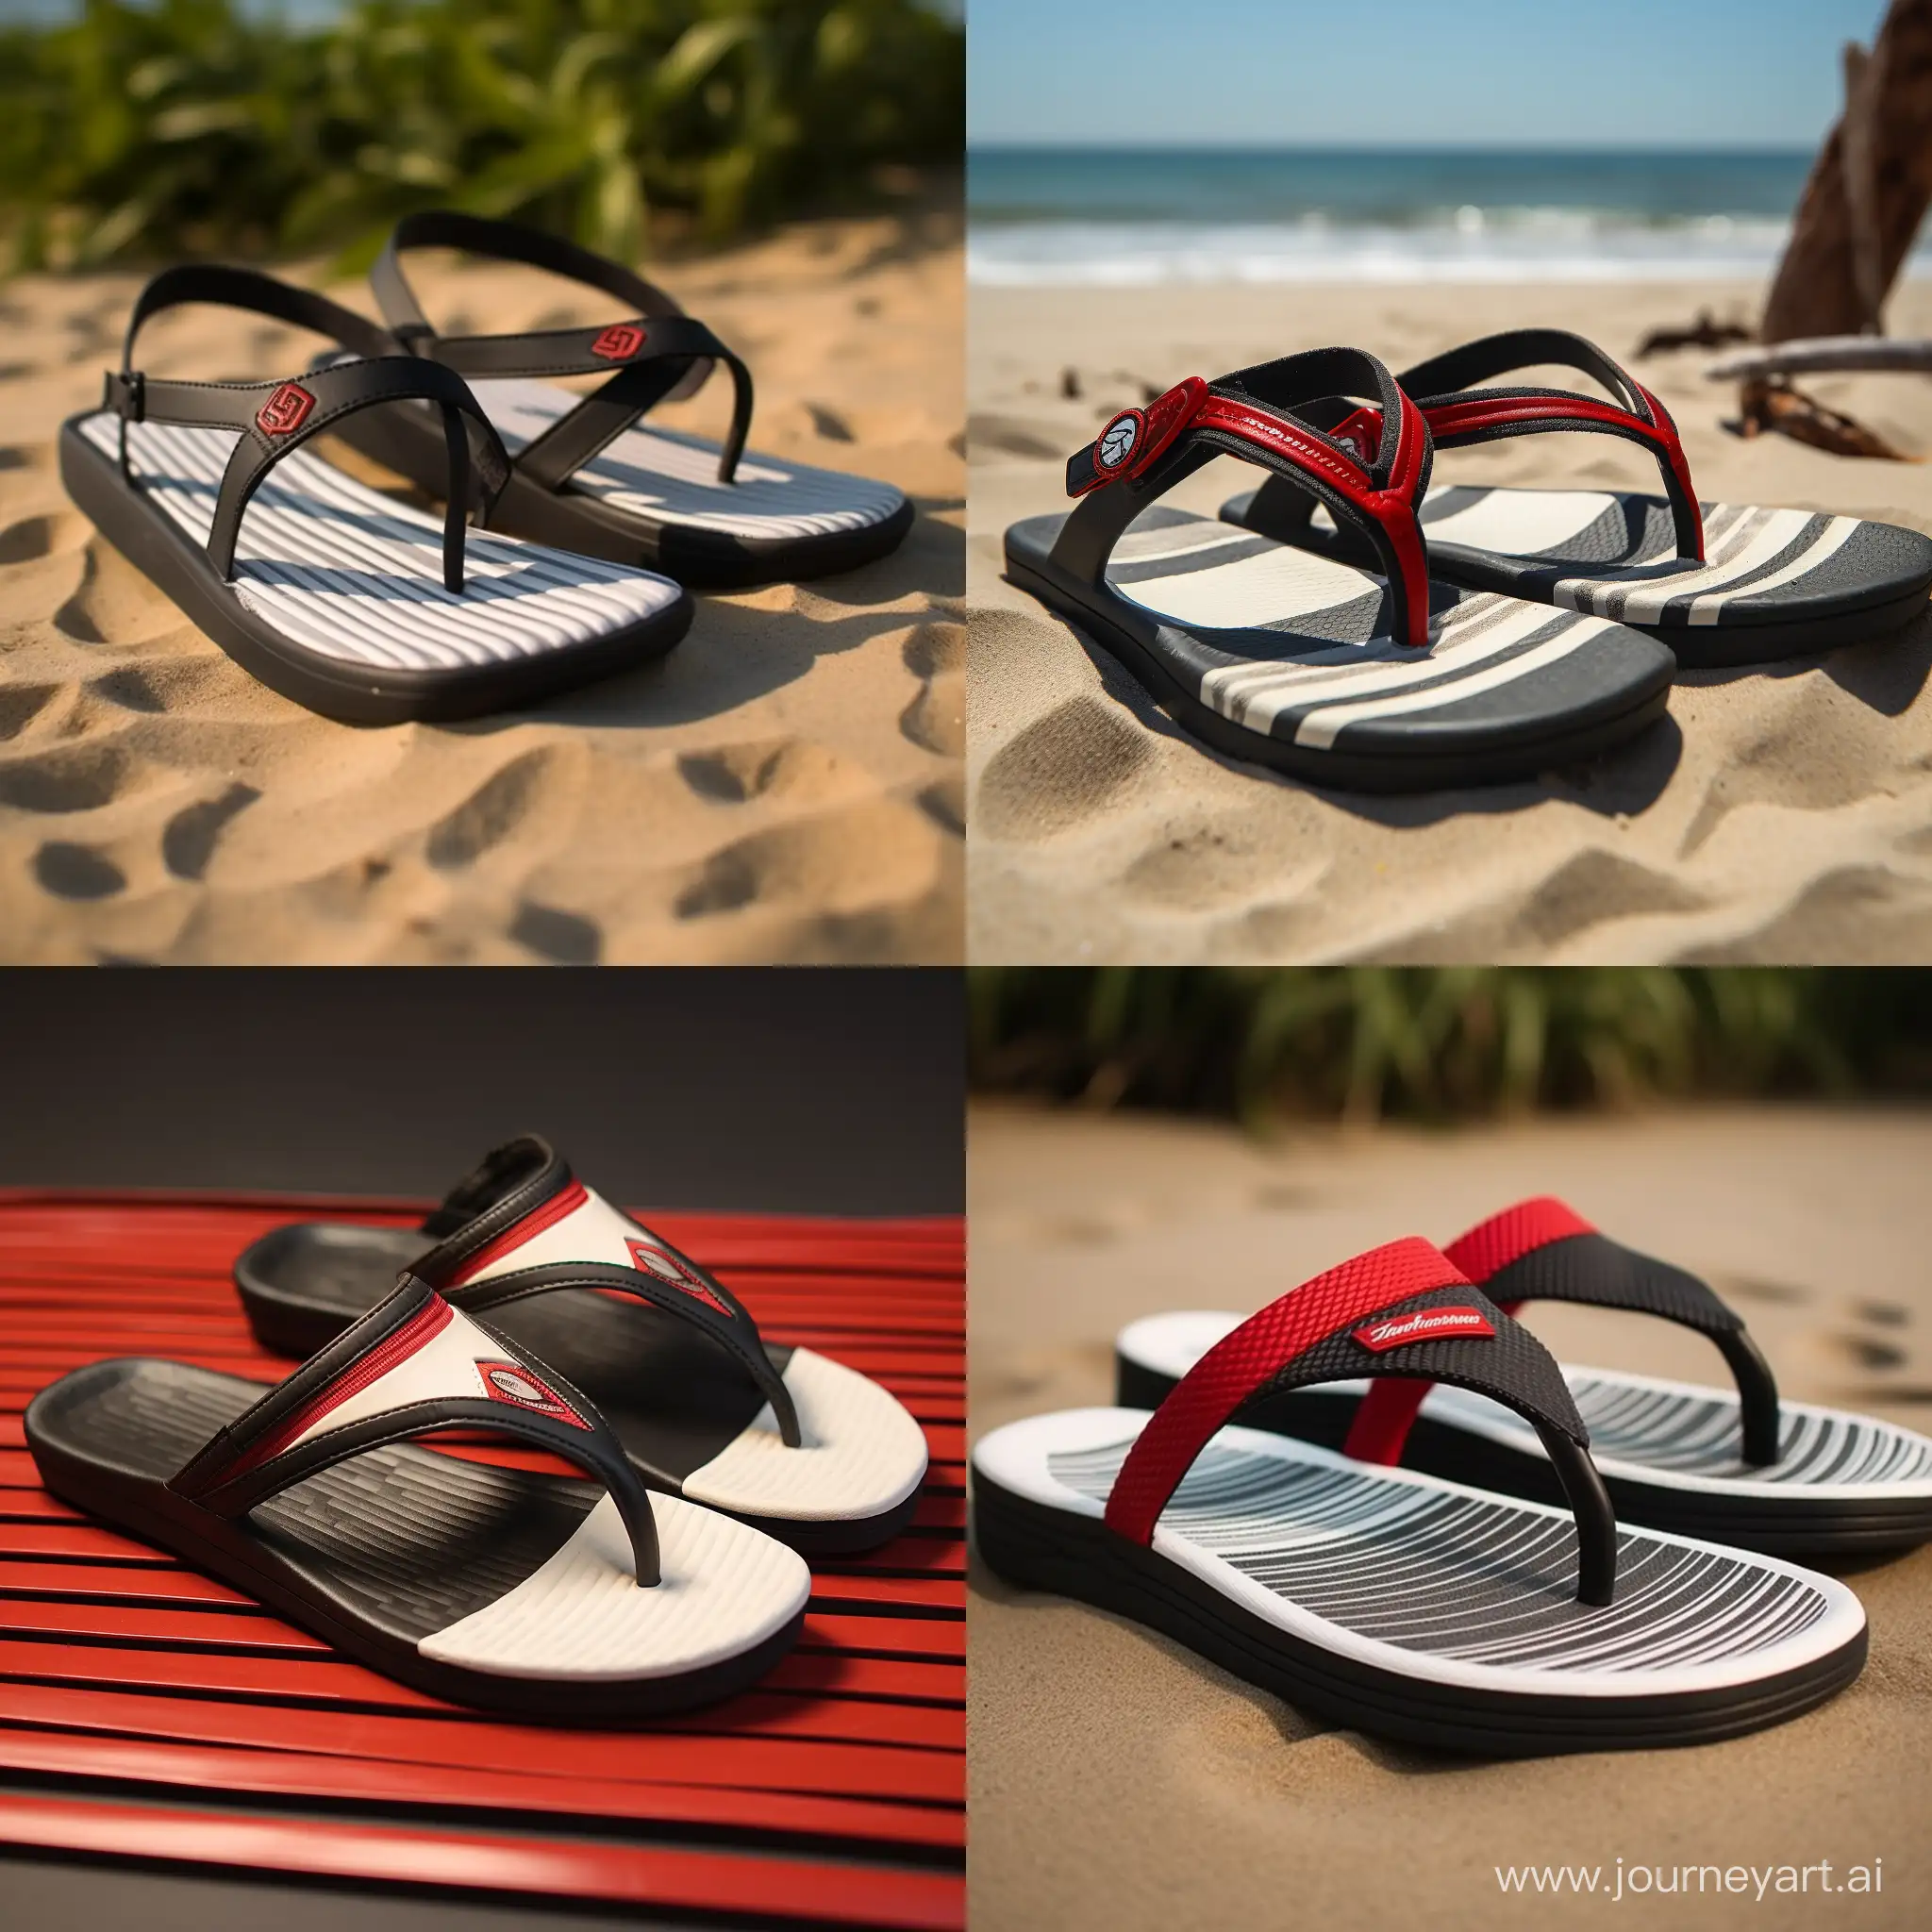 Stylish-Brazilian-Havaianas-Flip-Flops-with-Black-and-Red-Stripes-Fashionable-Comfort-for-Any-Occasion